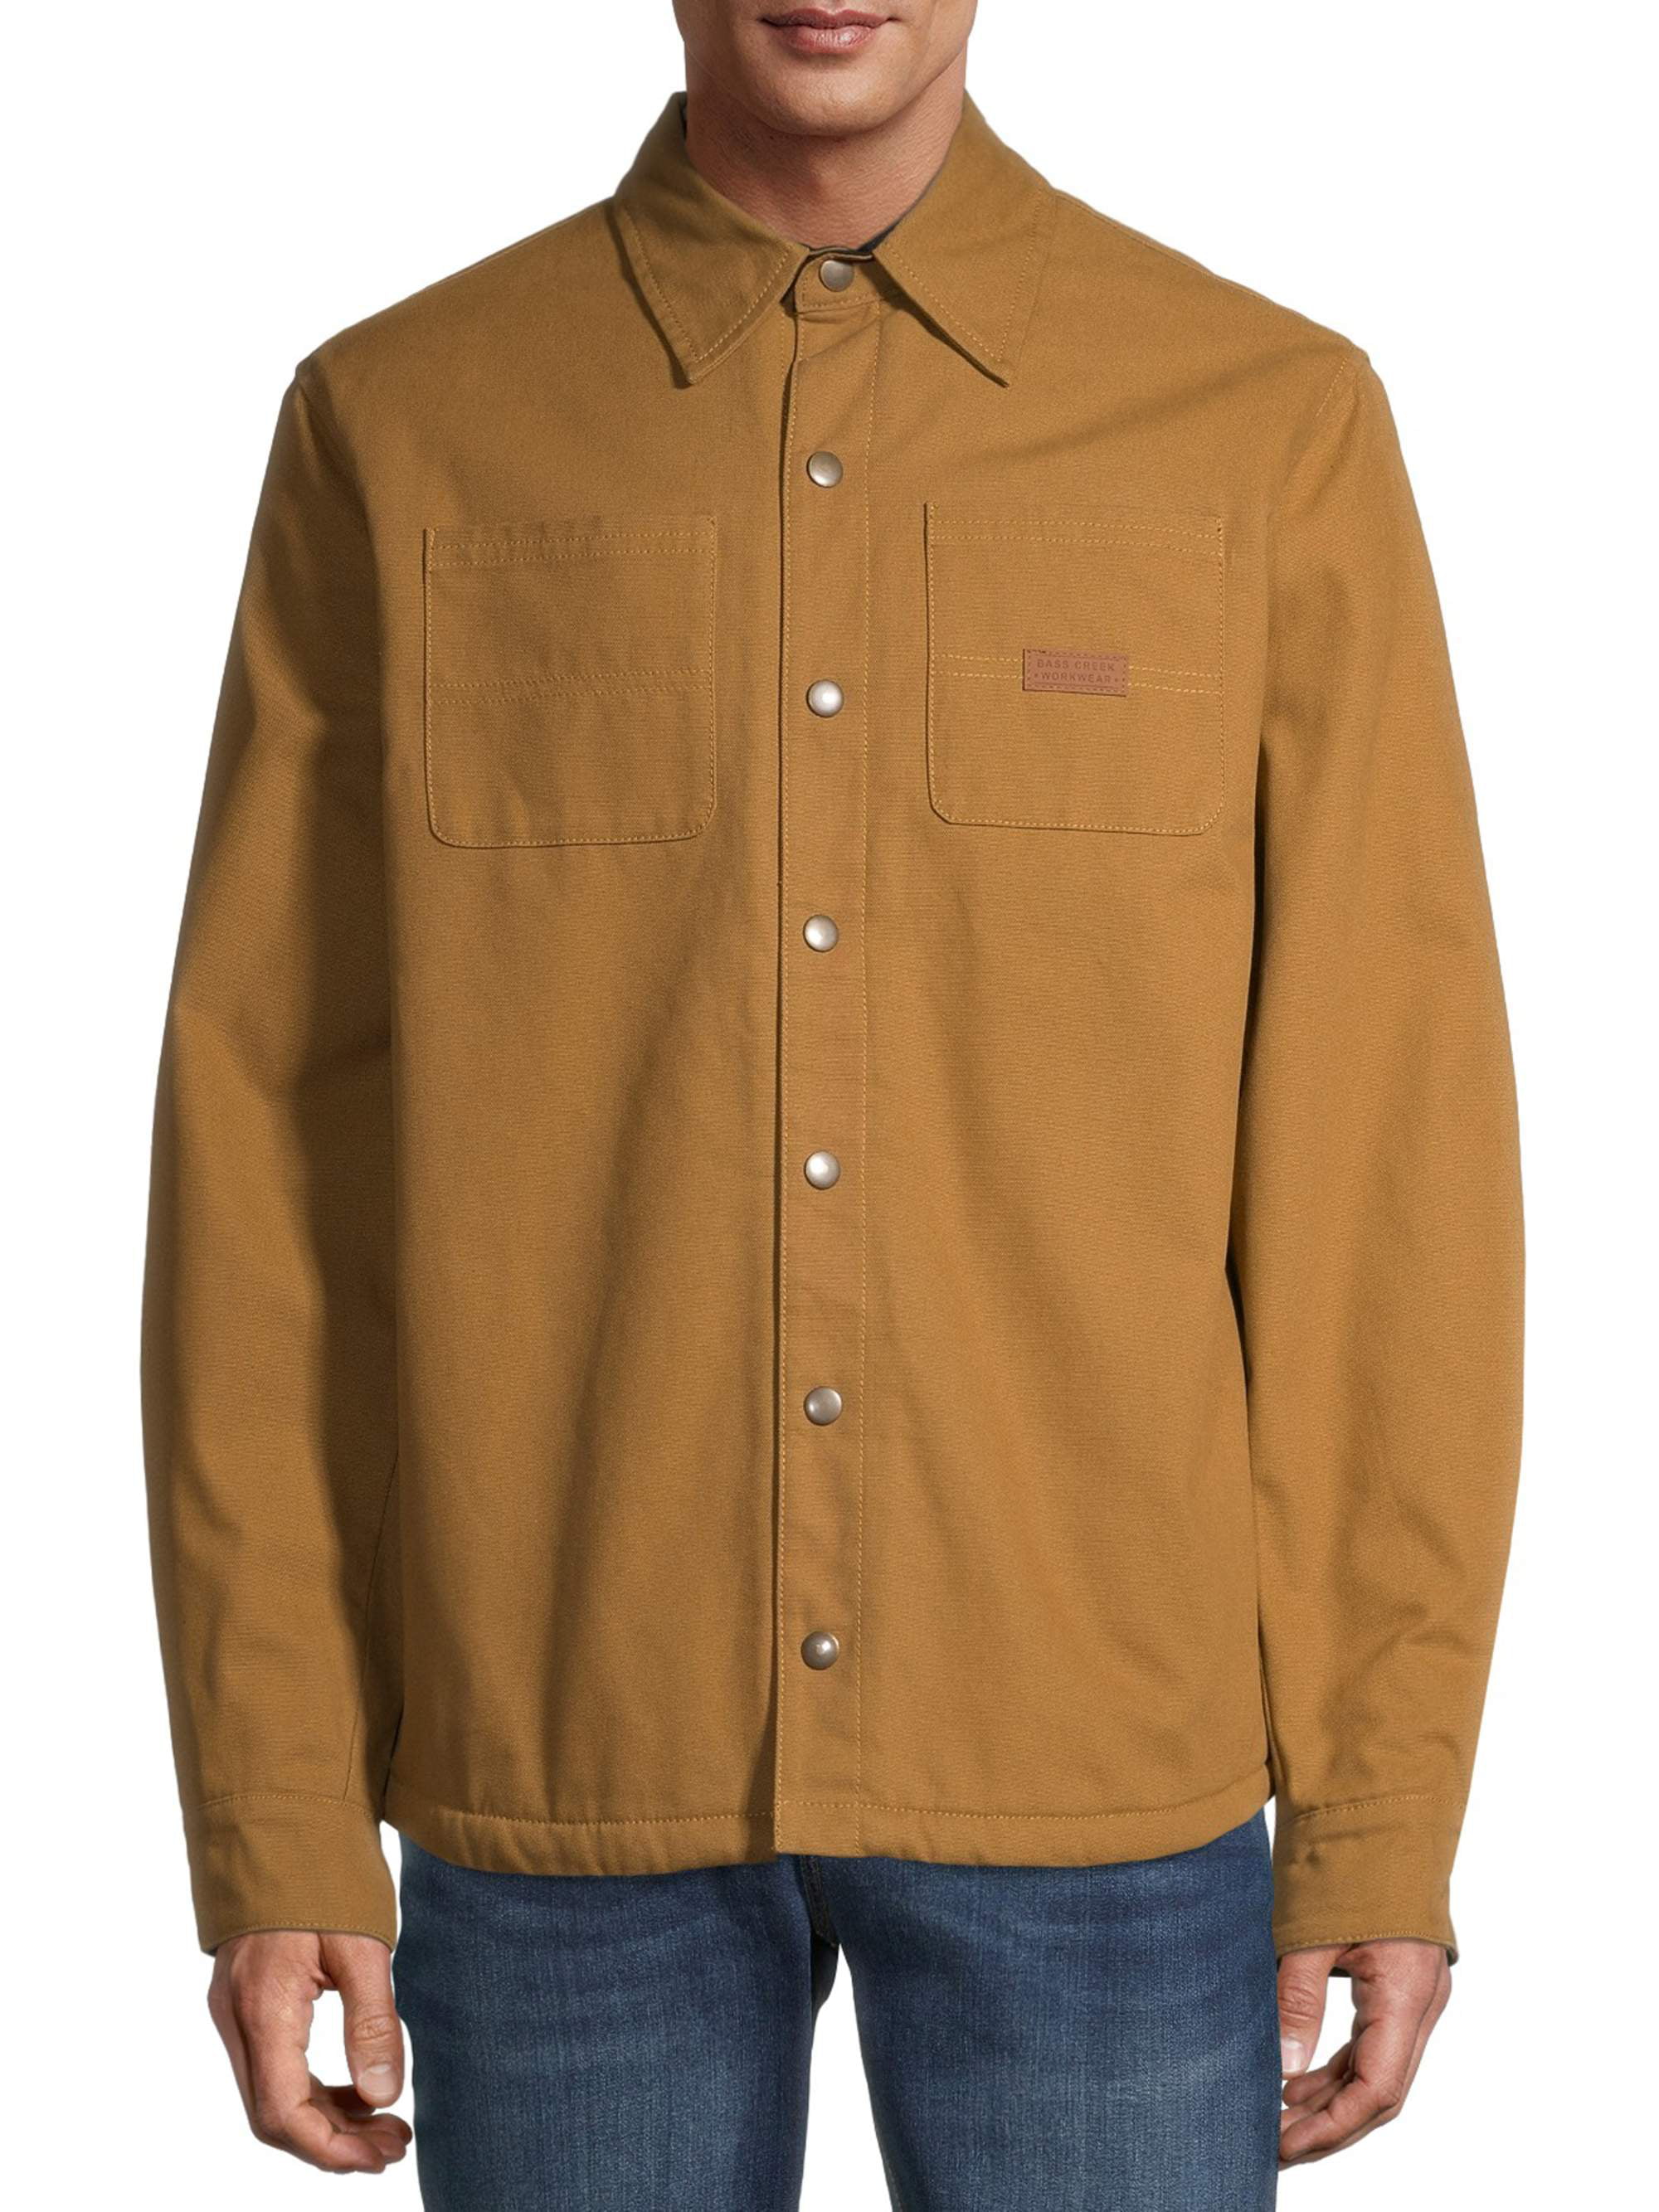 Bass Creek Men’s Duck Canvas Shirt Jacket with Faux Sherpa Lining ...